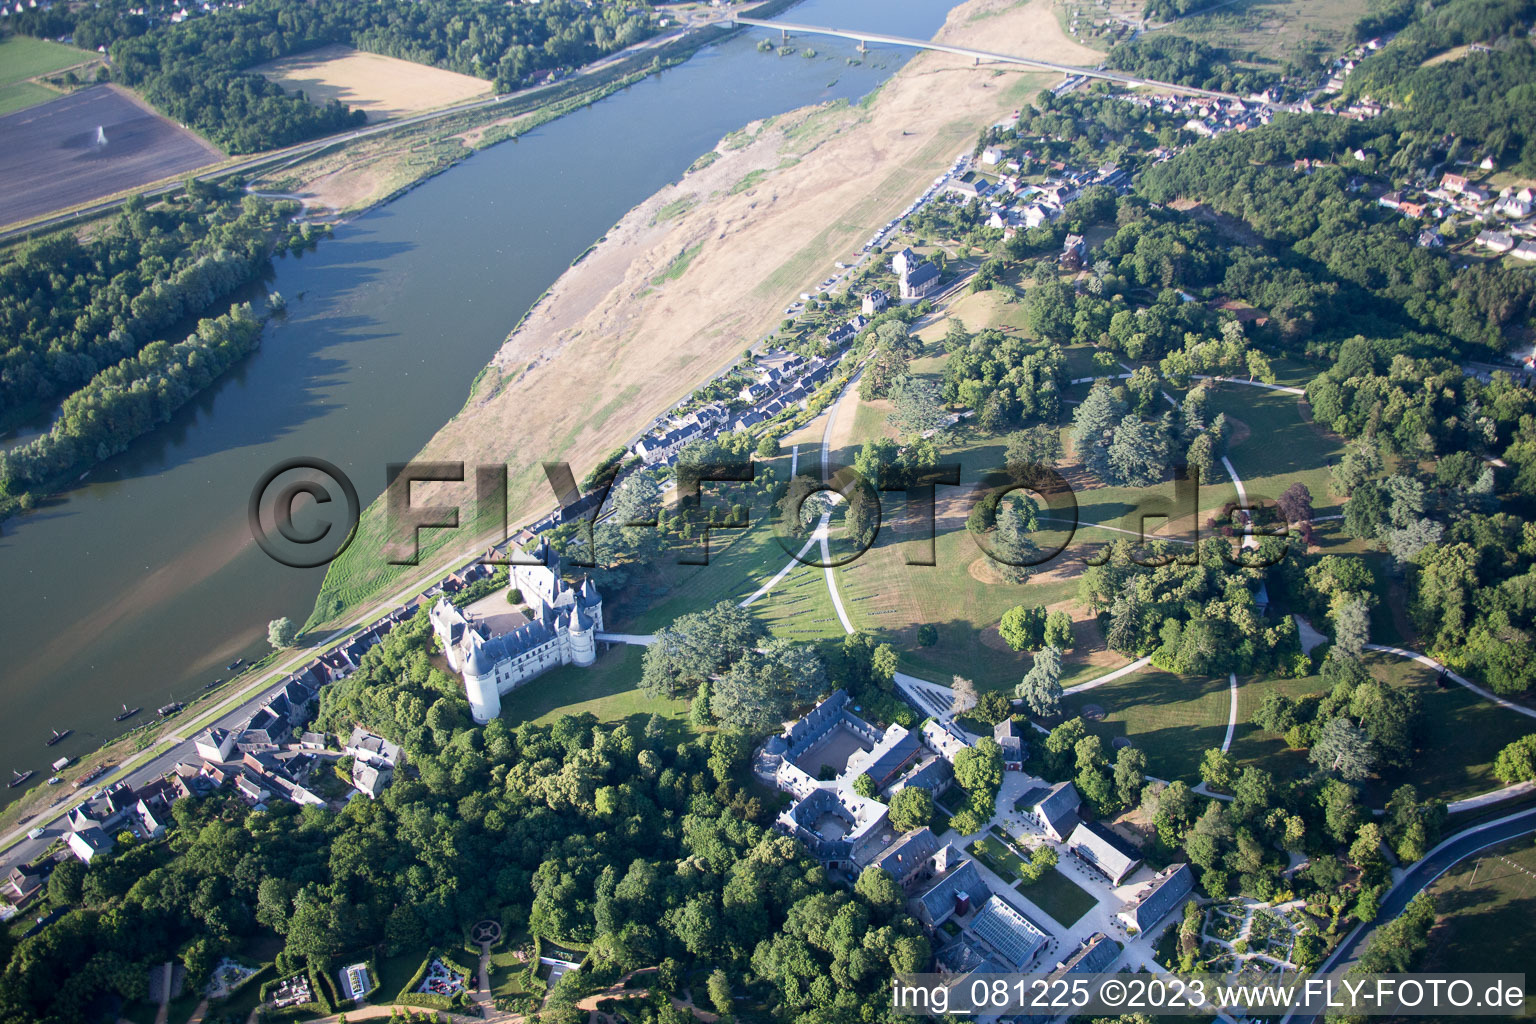 Chaumont-sur-Loire in the state Loir et Cher, France seen from a drone